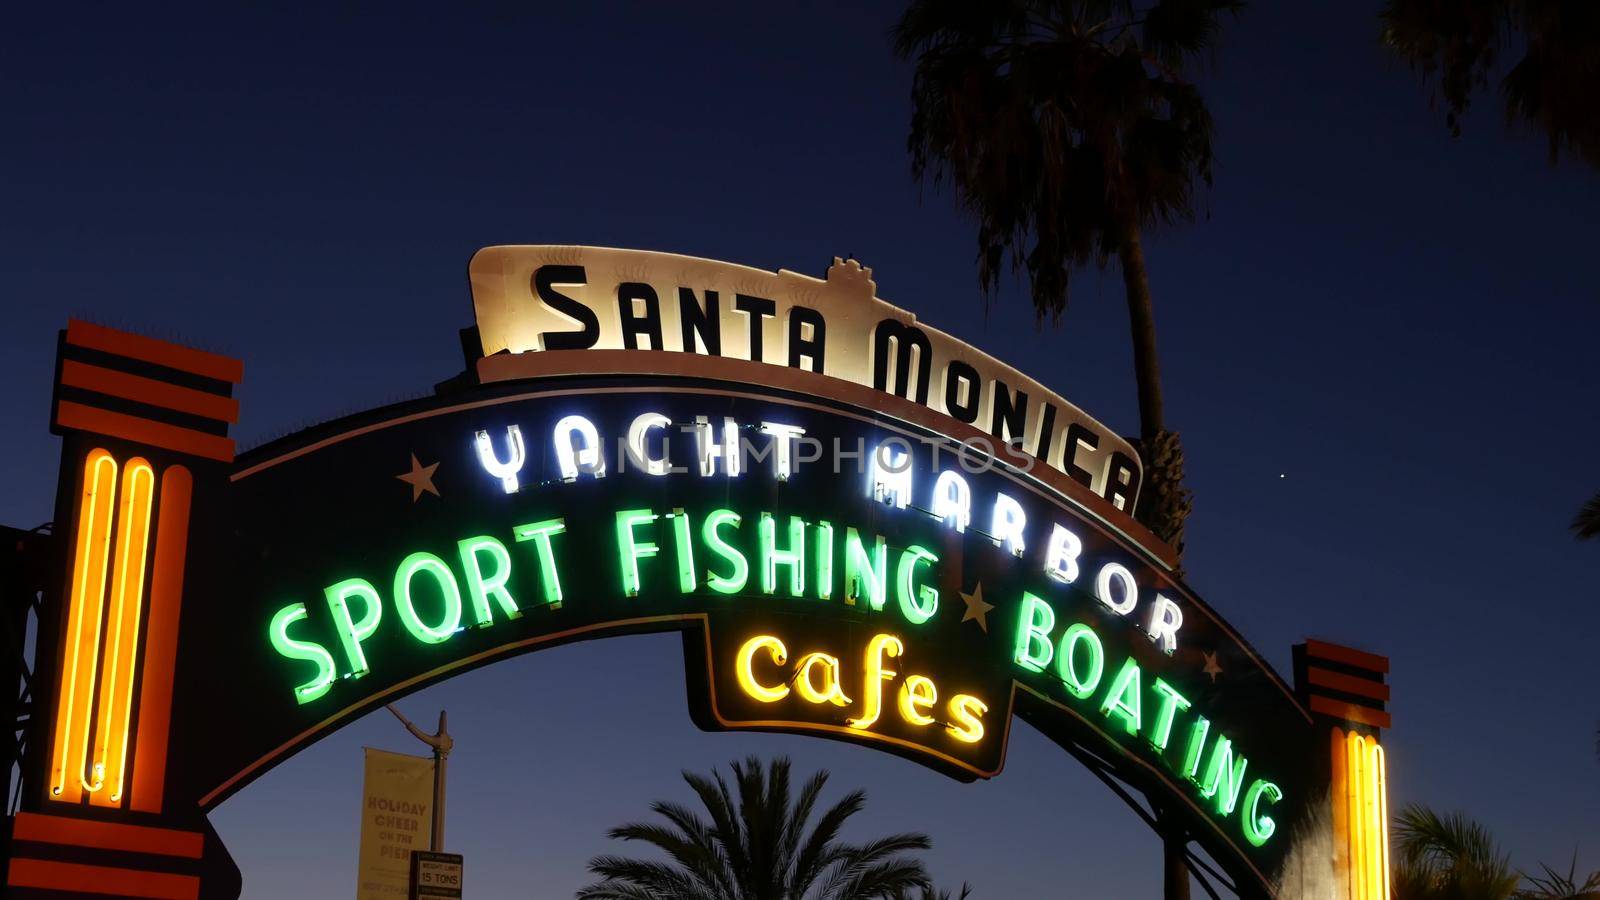 SANTA MONICA, LOS ANGELES CA USA - 19 DEC 2019: Summertime iconic vintage symbol. Classic illuminated retro sign on pier. California summertime aesthetic. Glowing lettering on old-fashioned signboard by DogoraSun